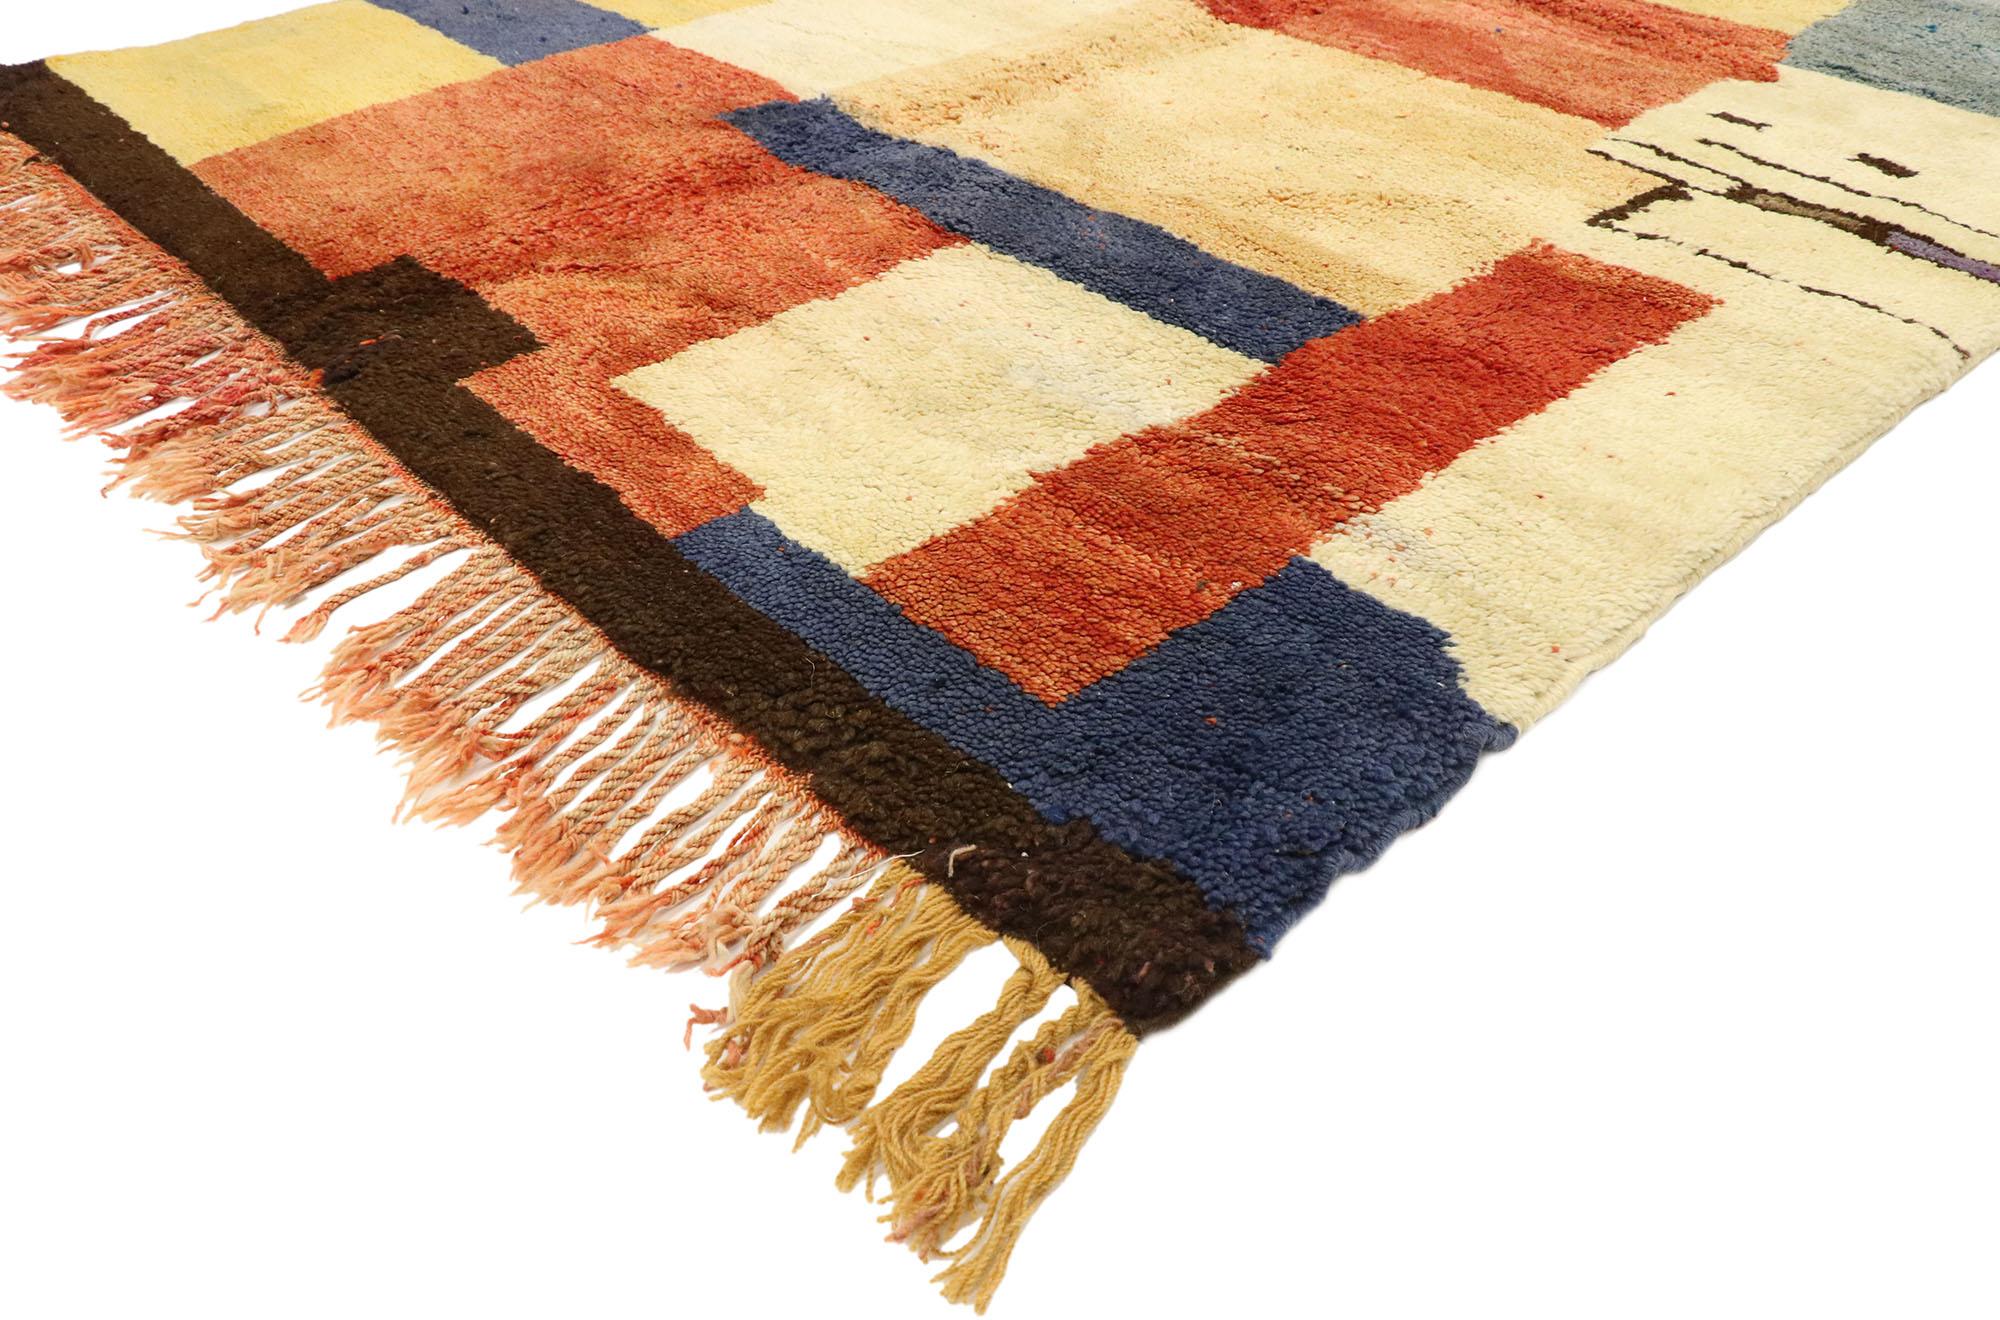 20592 Vintage Berber Moroccan Rug with Postmodern Cubism Bauhaus Mondrian Style. Displaying a Postmodern Cubism and Mondrian Bauhaus style, this hand-knotted wool vintage Berber Moroccan rug synthesizes beautifully with modern architecture and MCM